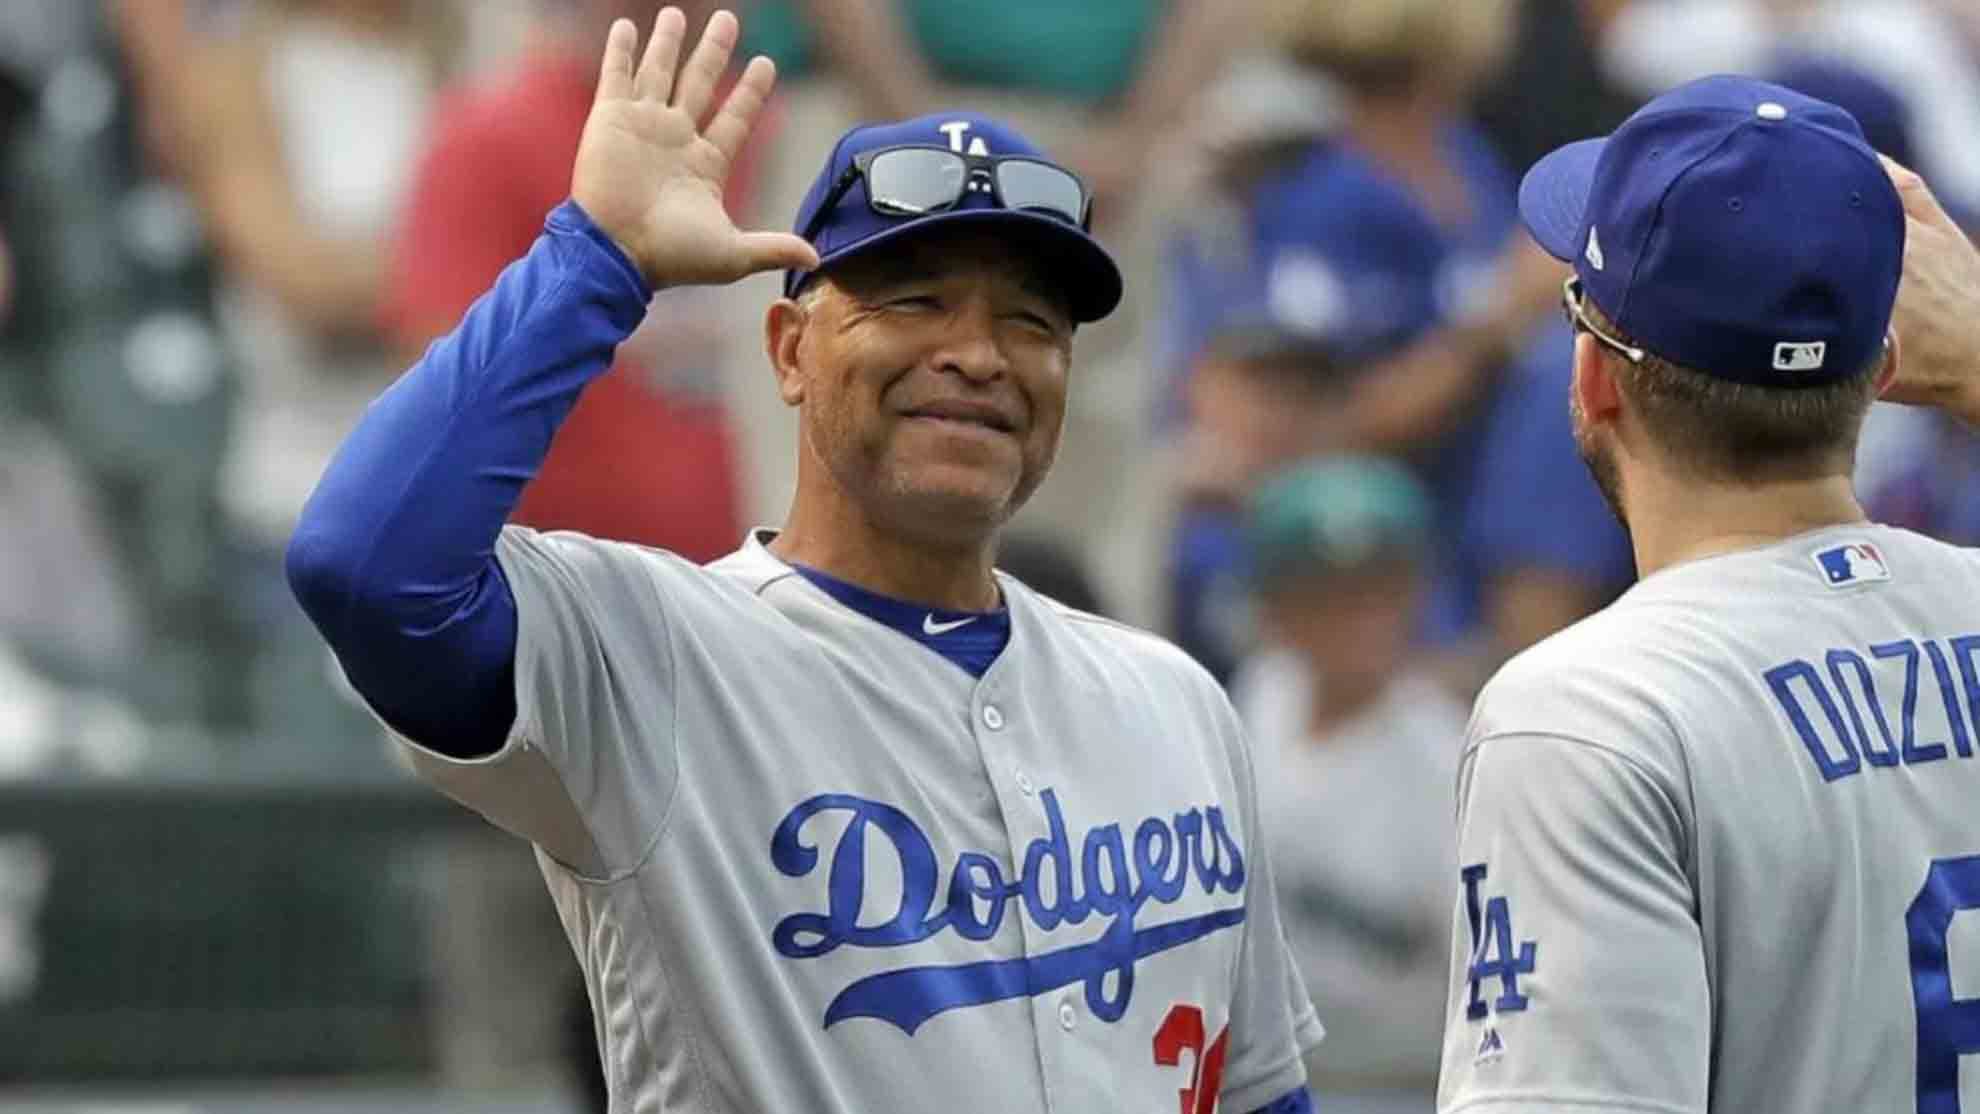 Dave Roberts guarantees Dodgers will win World Series in 2022